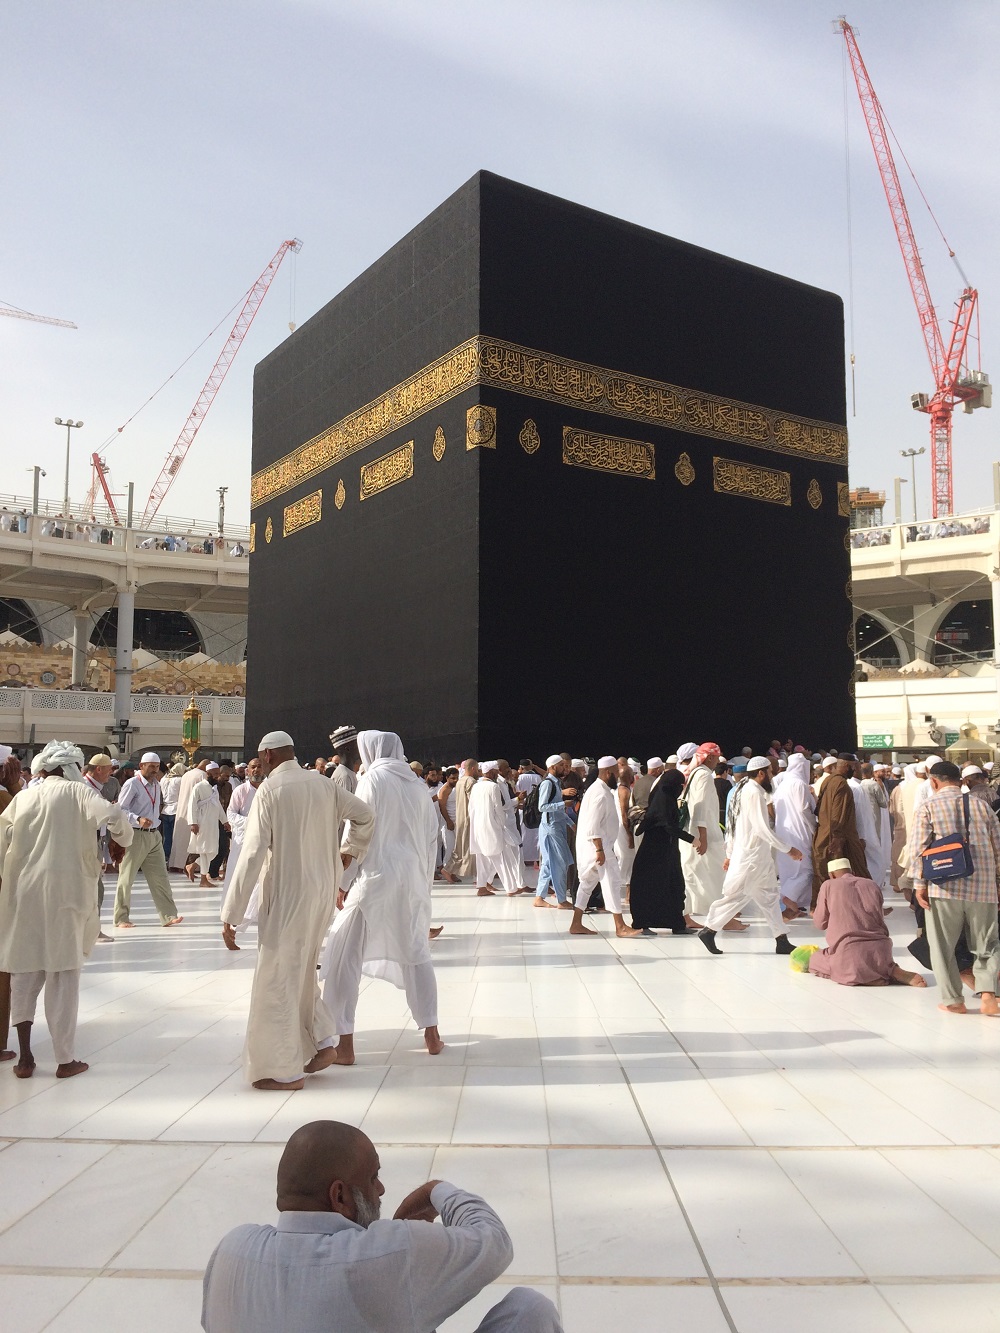 Memories From My First Umrah Trip - IlmFeed